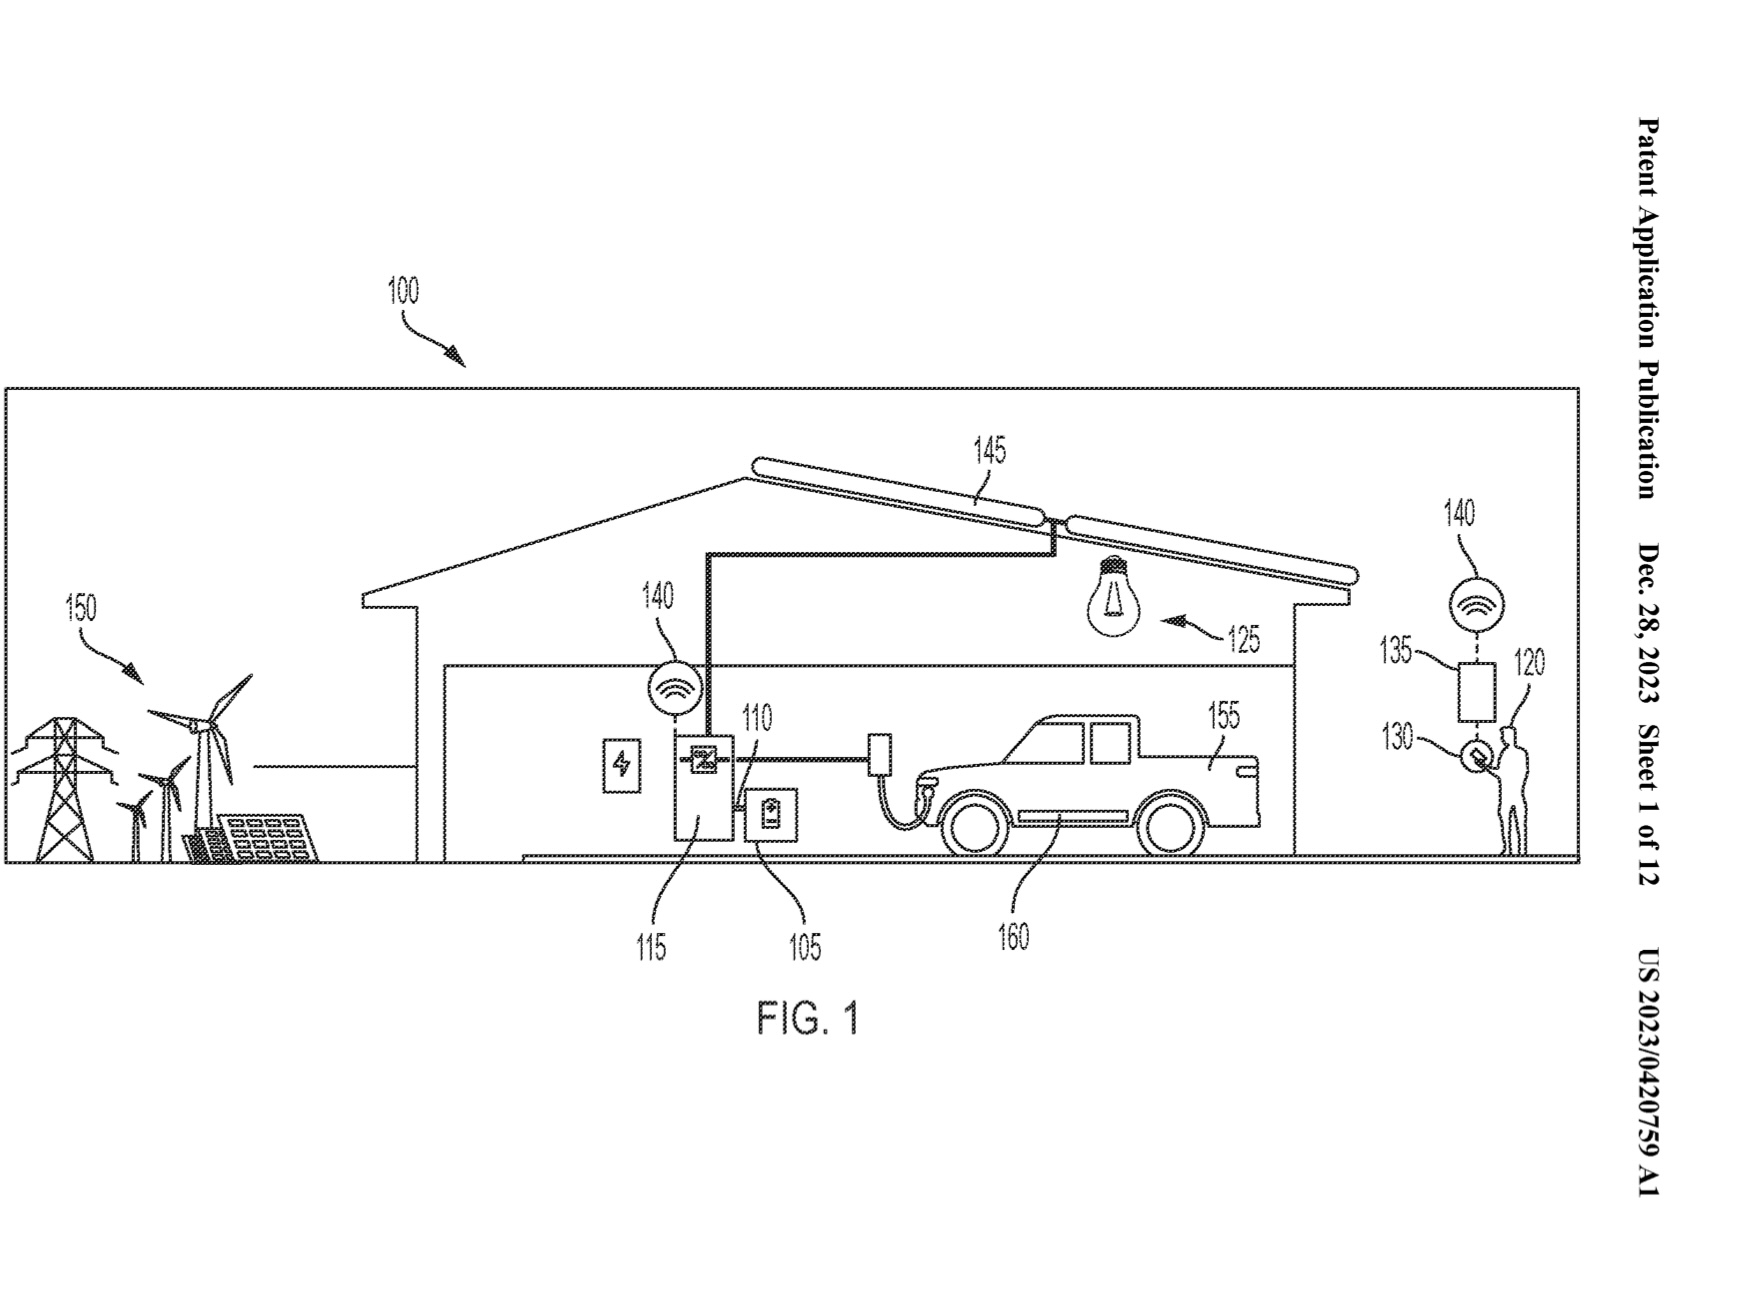 Rivian R1T R1S Rivian patents “Energy Storage Device” (Tesla Powerwall-like home energy storage system?) IMG_7751